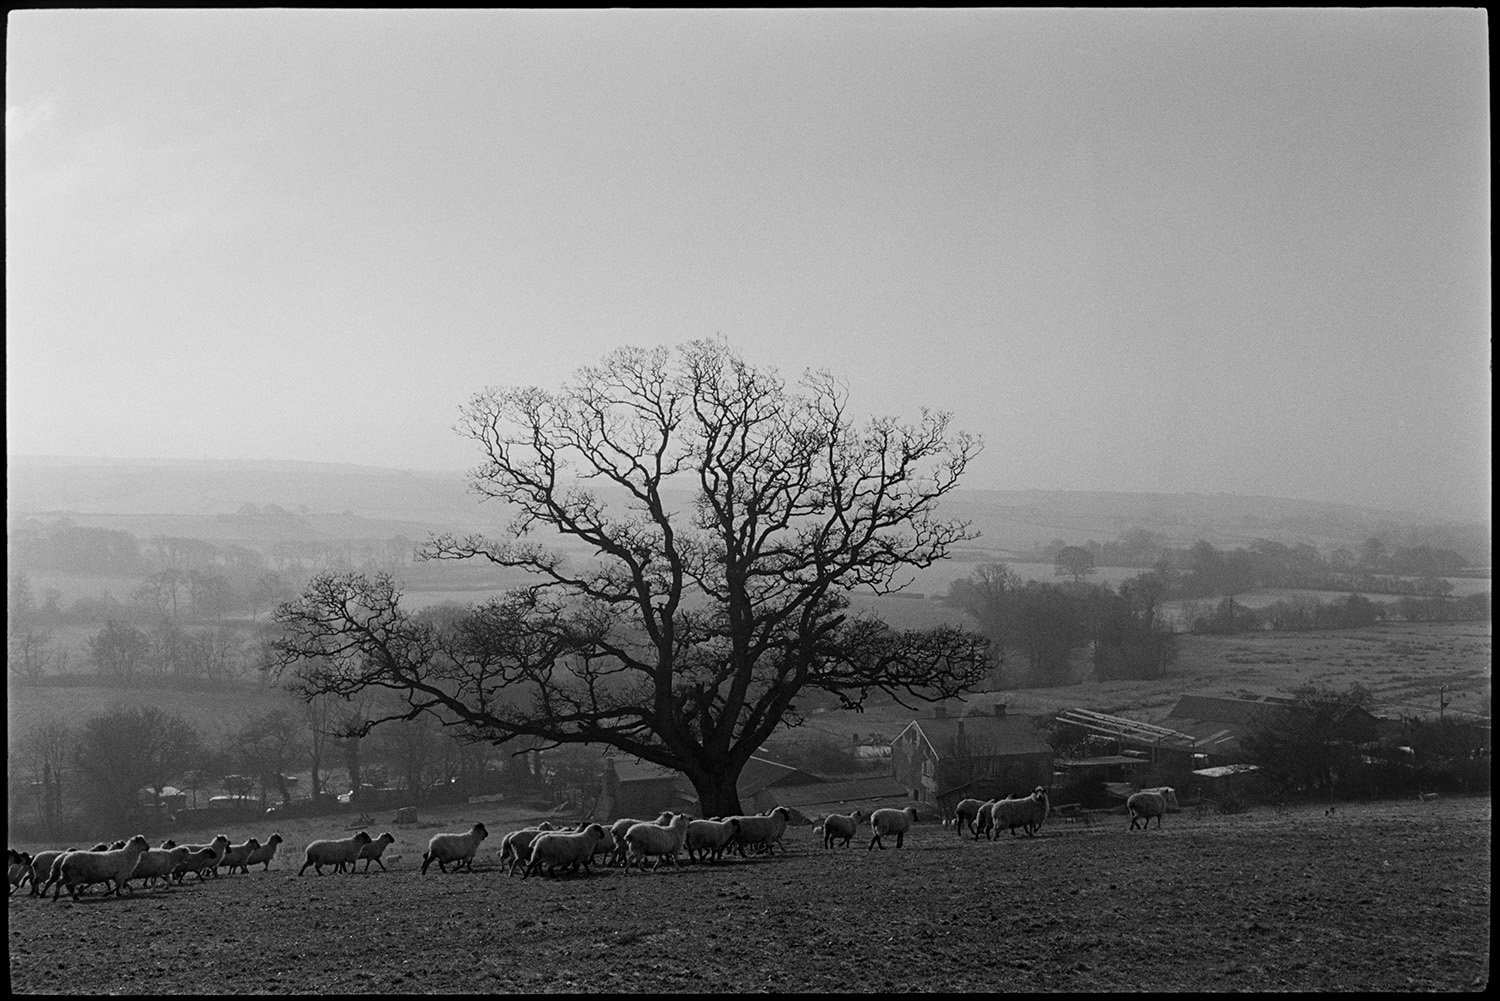 Large old oak in field with sheep, farmer feeding cattle, distant view with shepherd.
[A flock of sheep walking past a large oak tree in a field at Brushford Barton. A number of farm buildings are visible with a misty landscape of trees and fields in the background.]